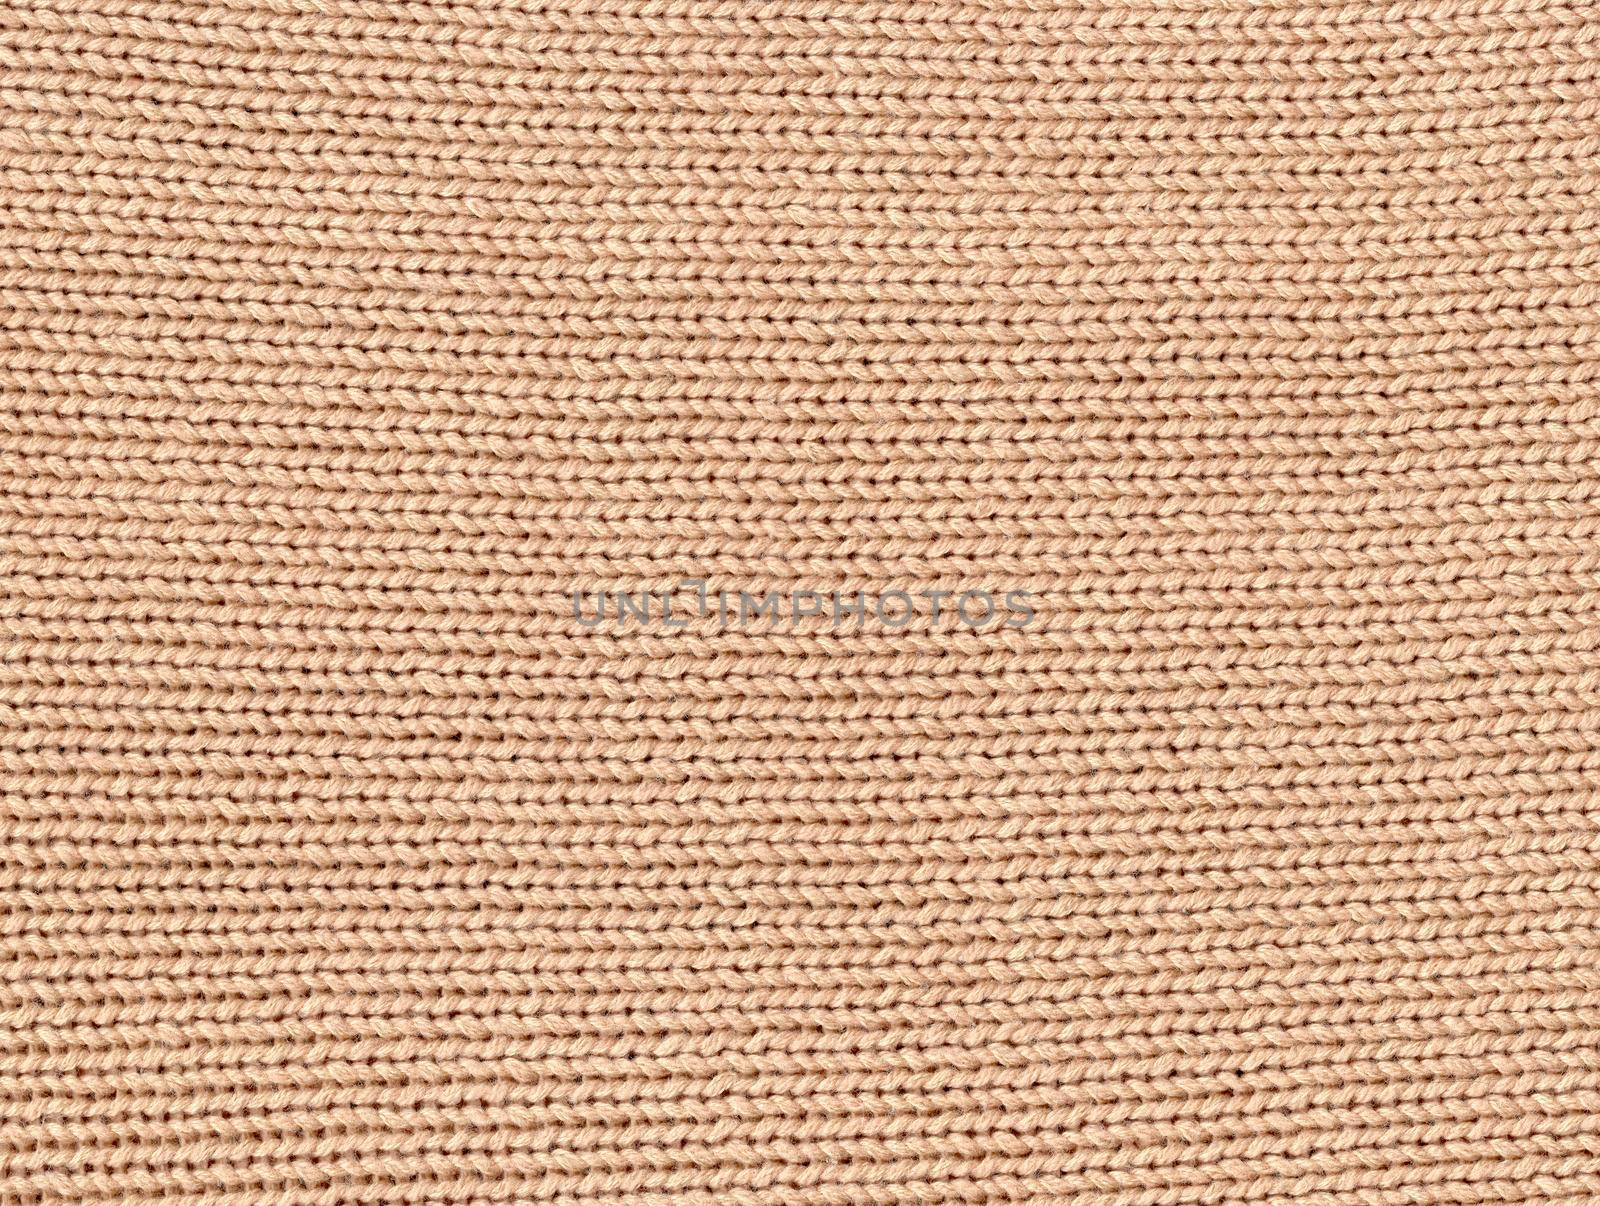 Beige knitted pattern background. Crochet fabric texture by dreamloud